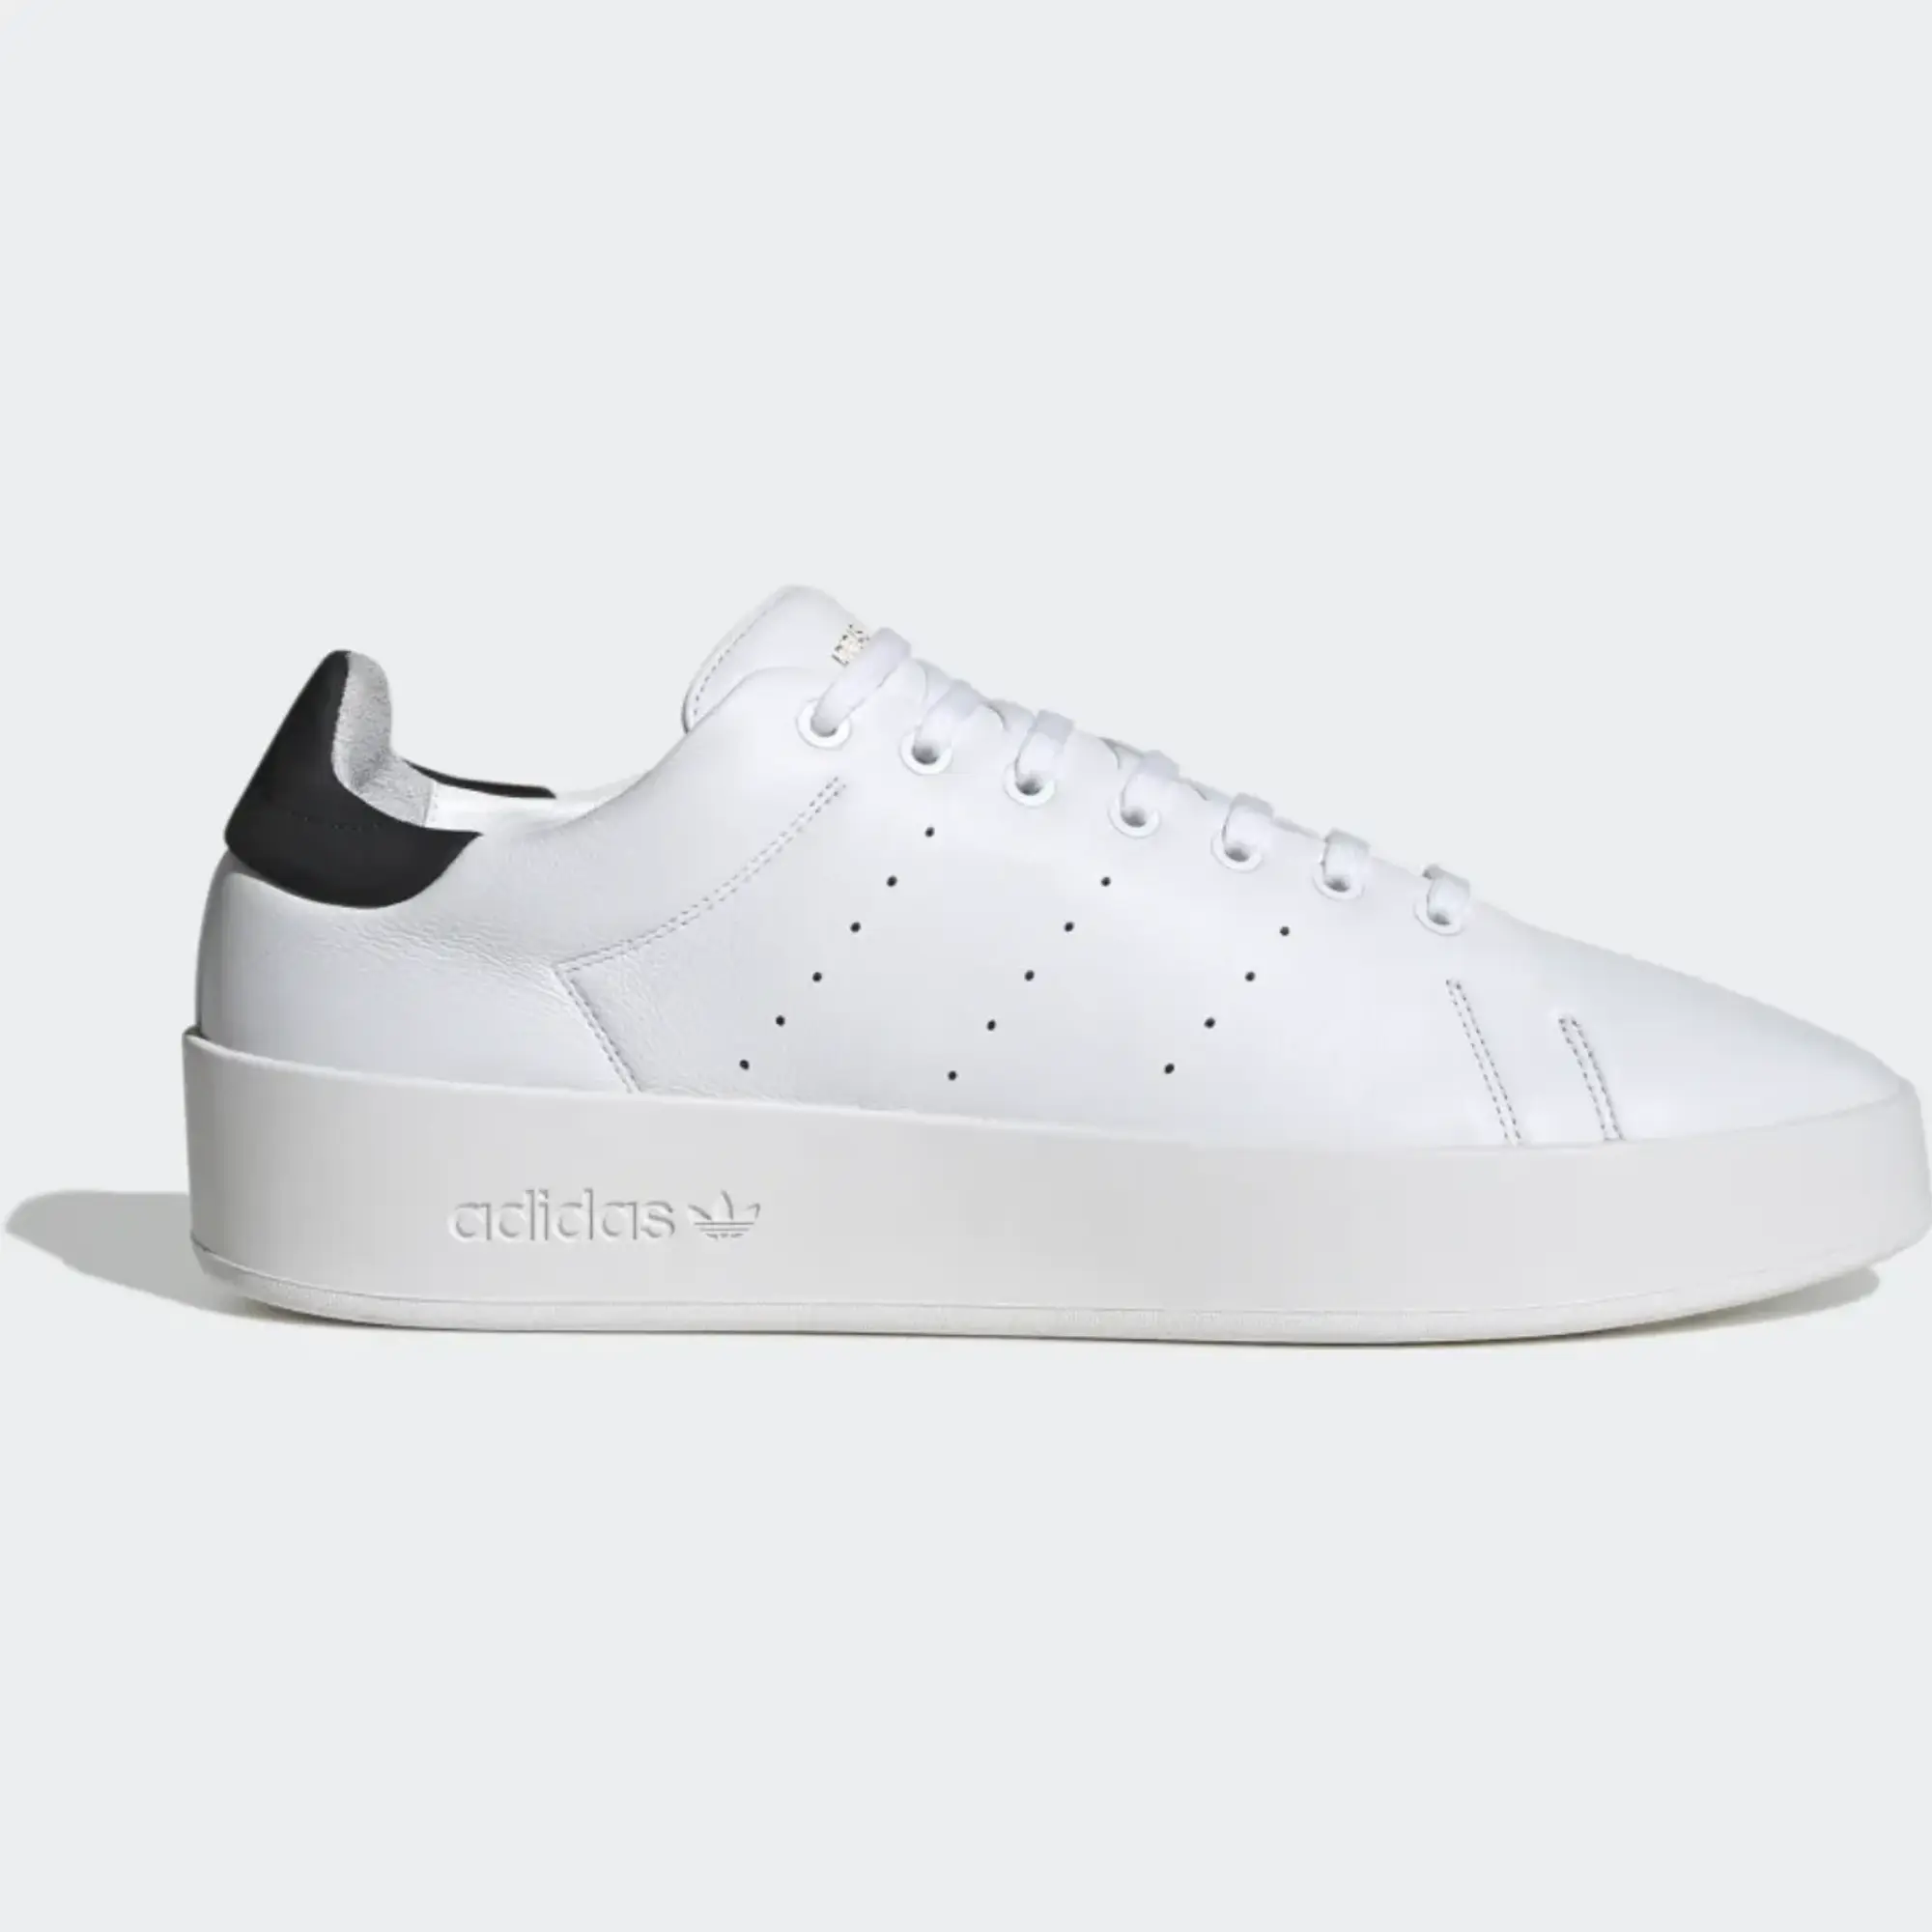 Adidas Originals Stan Smith Relasted Trainers In White